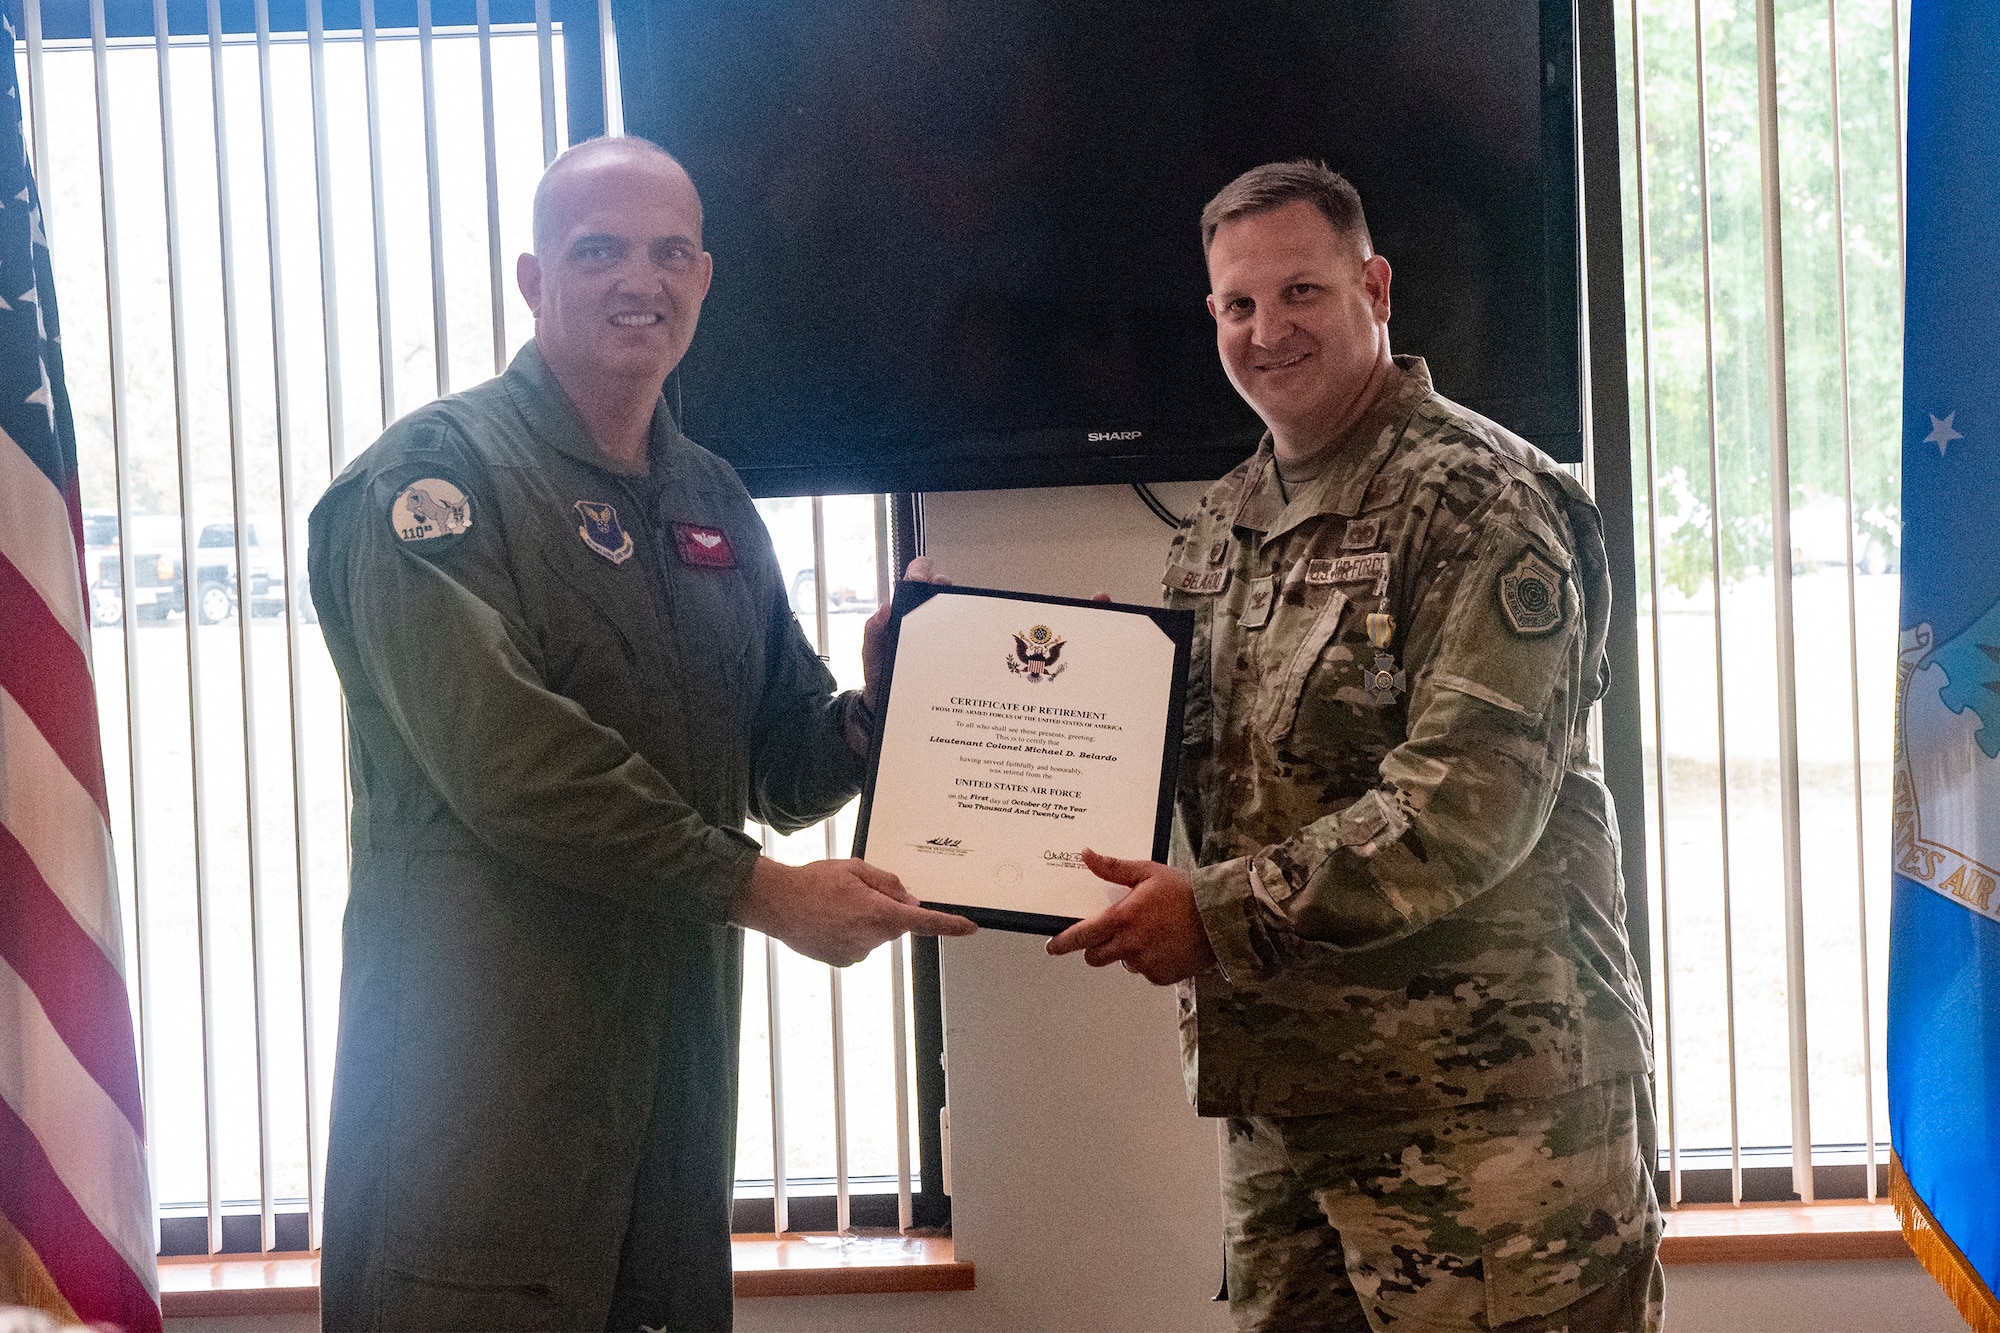 Retired Lt. Col. Ryan Bailey, former 131st Bomb Wing pilot, presents Col. Michael Belardo with a certificate f retirement during his retirement ceremony Oct. 2, 2021, at Whiteman Air Force Base, Missouri. Belardo, a B-2 Spirit stealth bomber pilot and 131st Maintenance Group commander, retired after many years of service in the Missouri Air National Guard. (U.S. Air National Guard photo by Master Sgt. John E. Hillier)